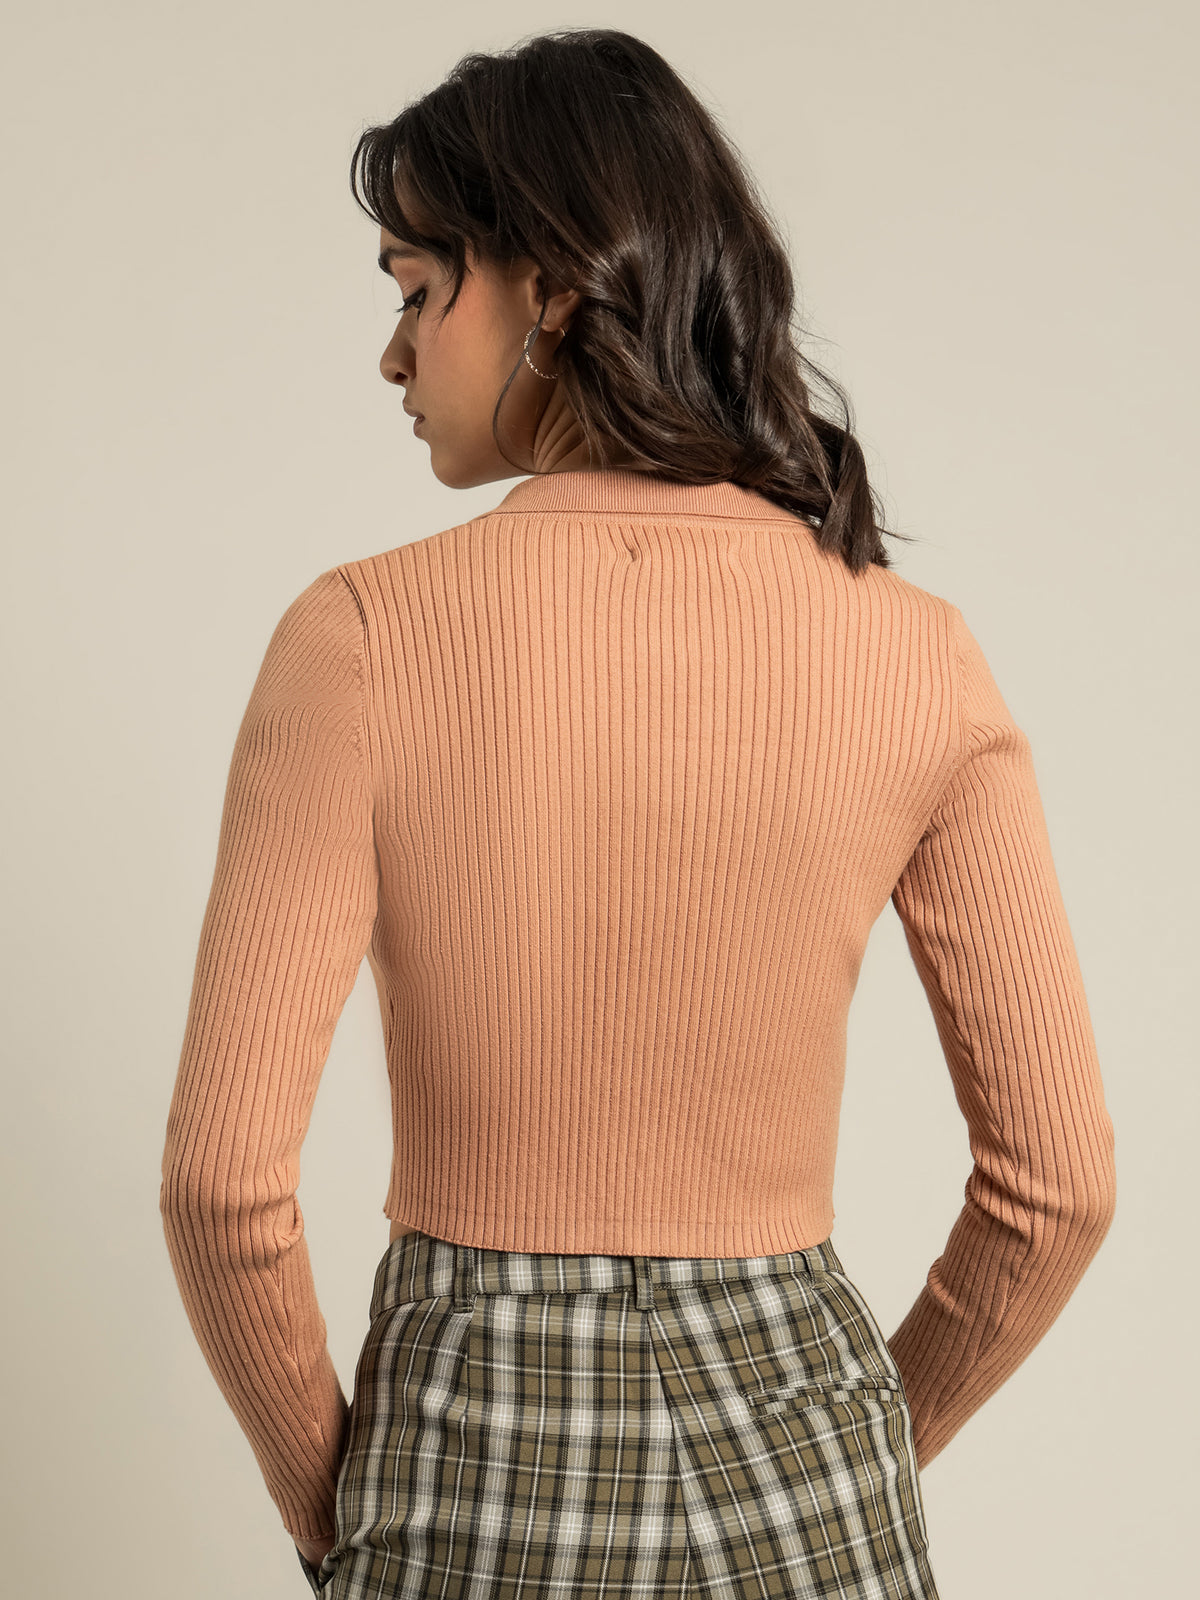 Kendra Zip Front Knit Top in Peach